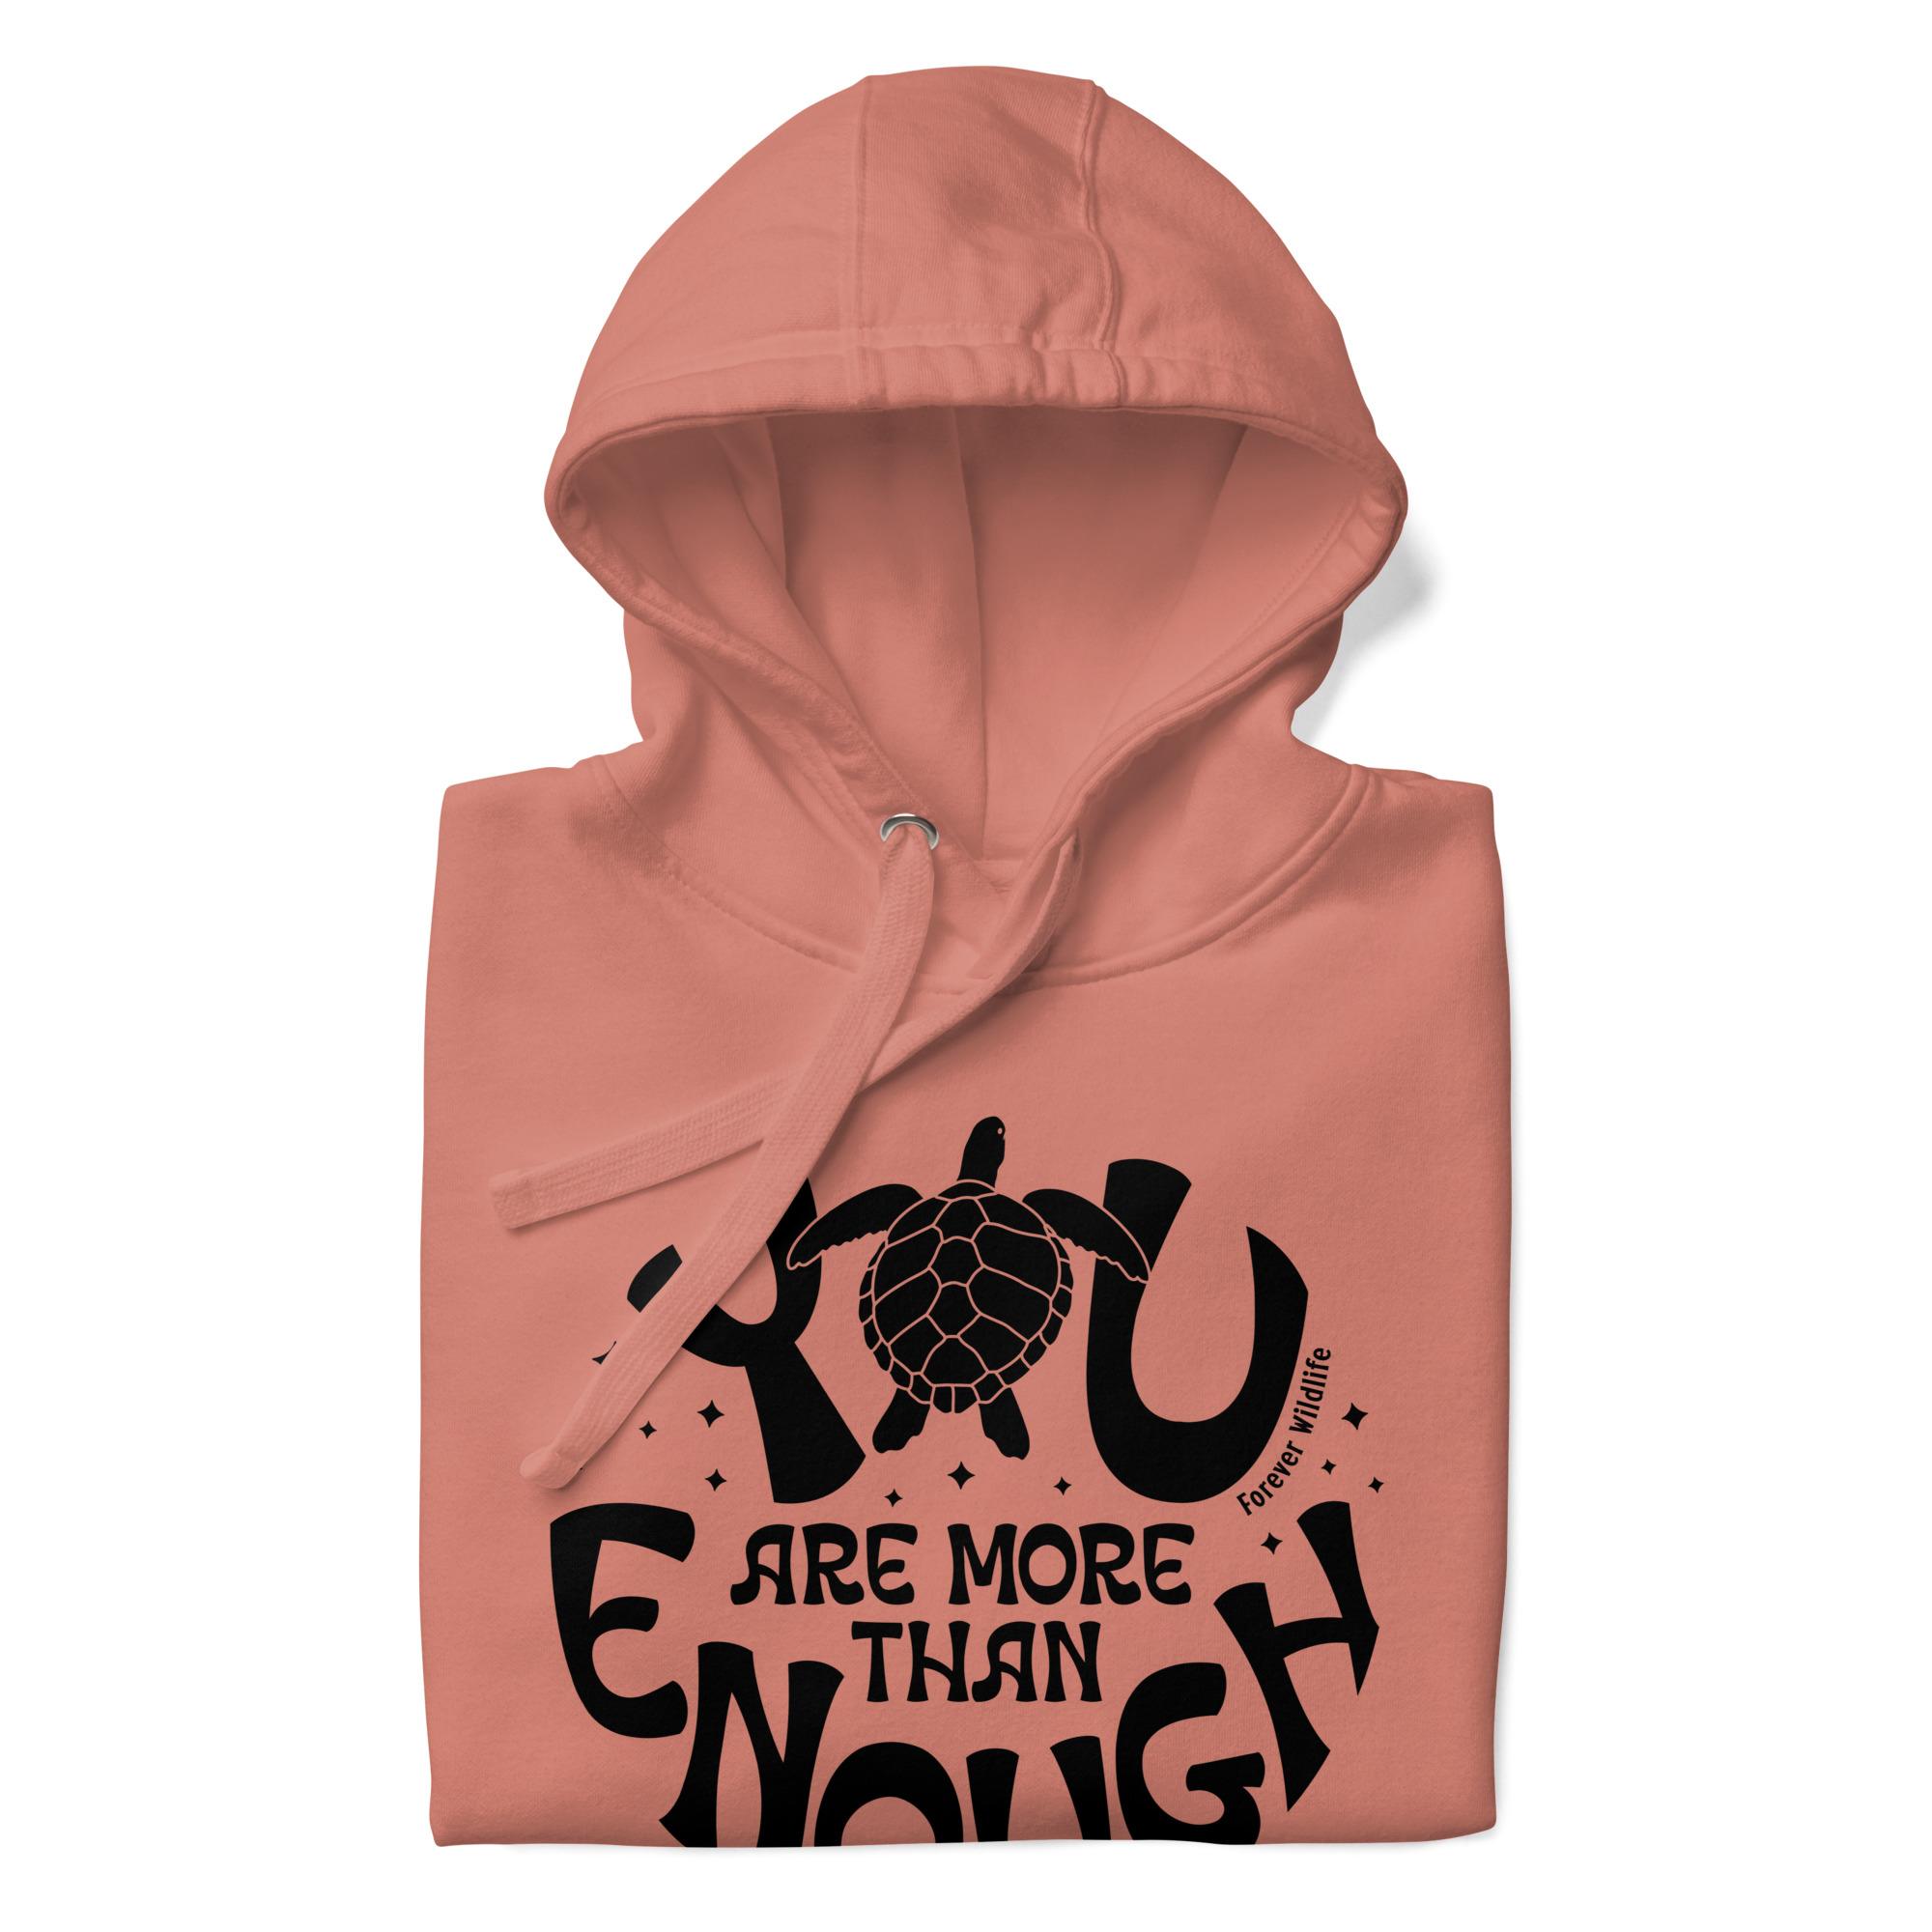 Sea Turtle Hoodie in Dusty Rose – Premium Wildlife Animal Inspirational Hoodie Design with YOu Are More Than Enough text, part of Wildlife Hoodies & Clothing from Forever Wildlife